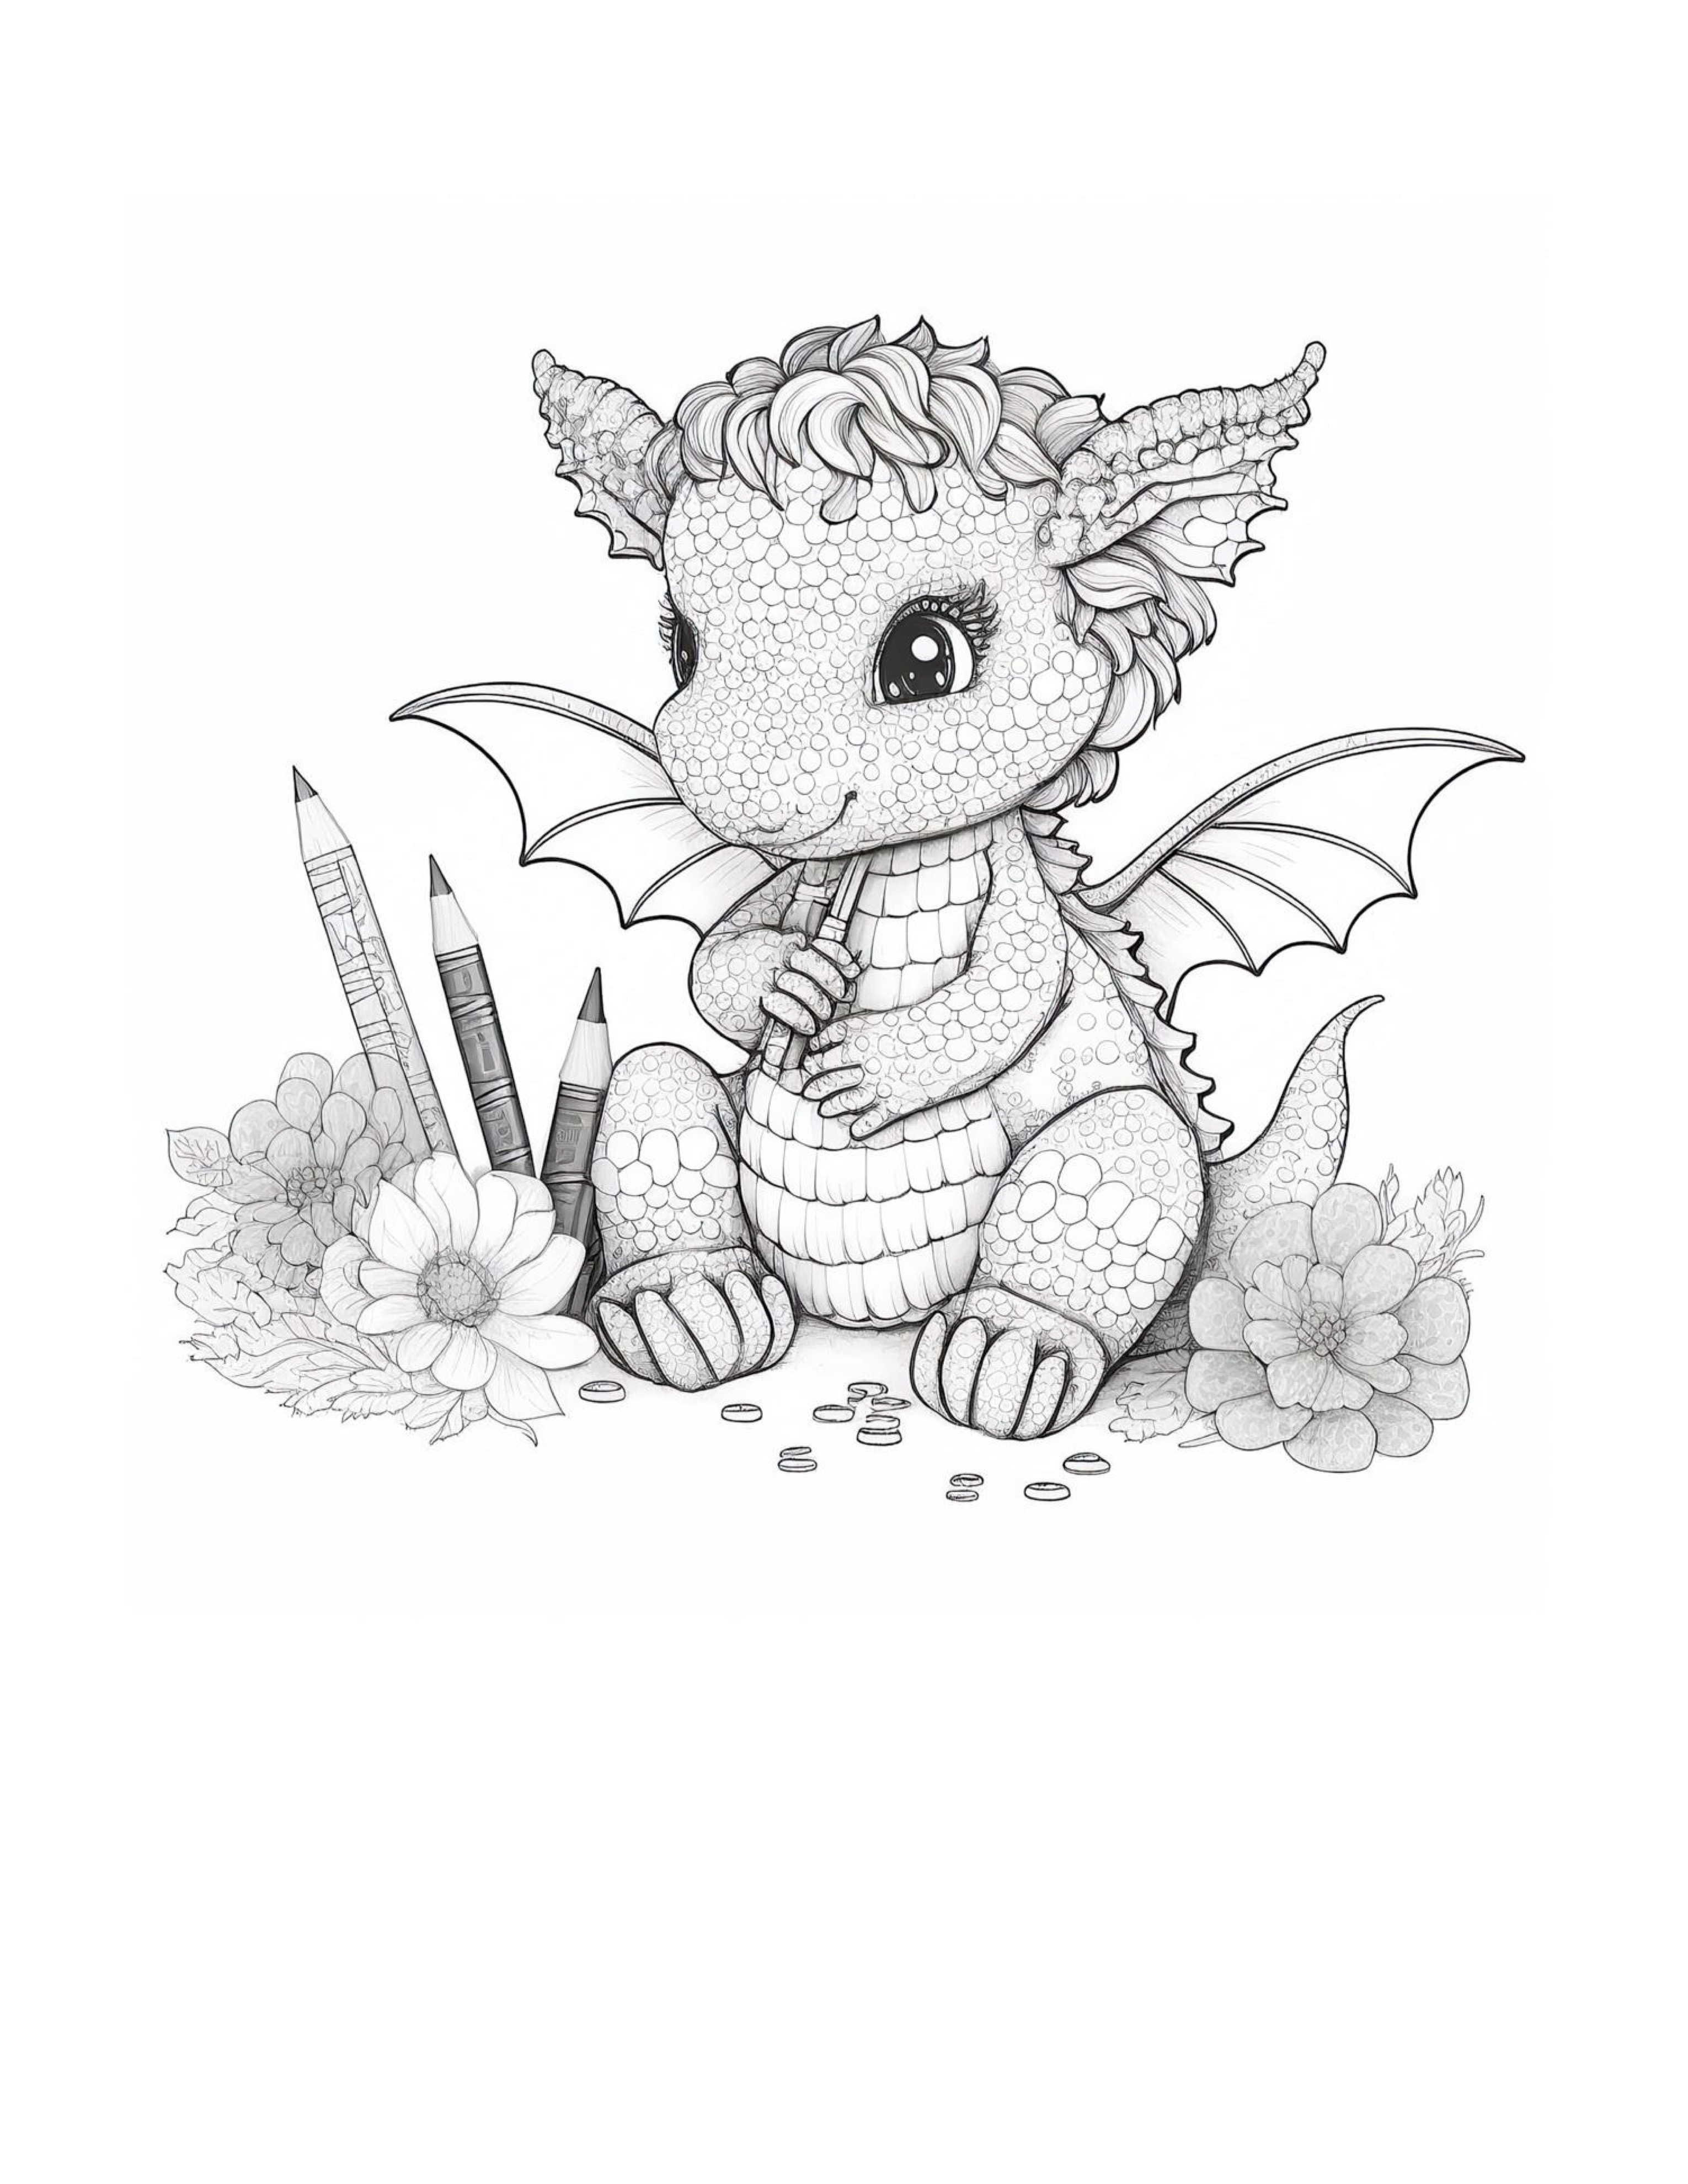 studying-dragon-coloring-pages.jpg